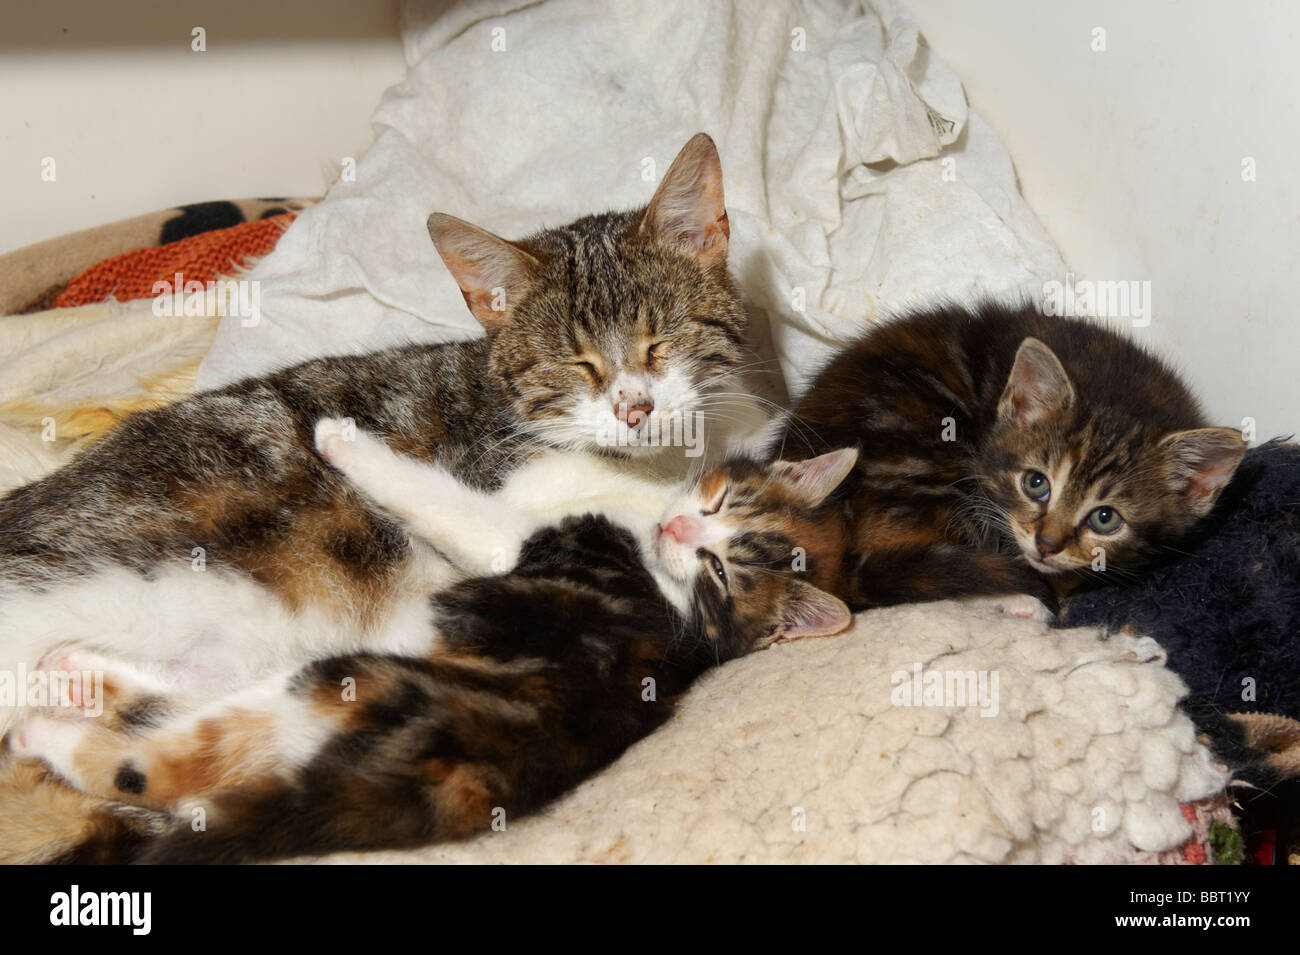 Female cat queen with young kittens in her care Stock Photo